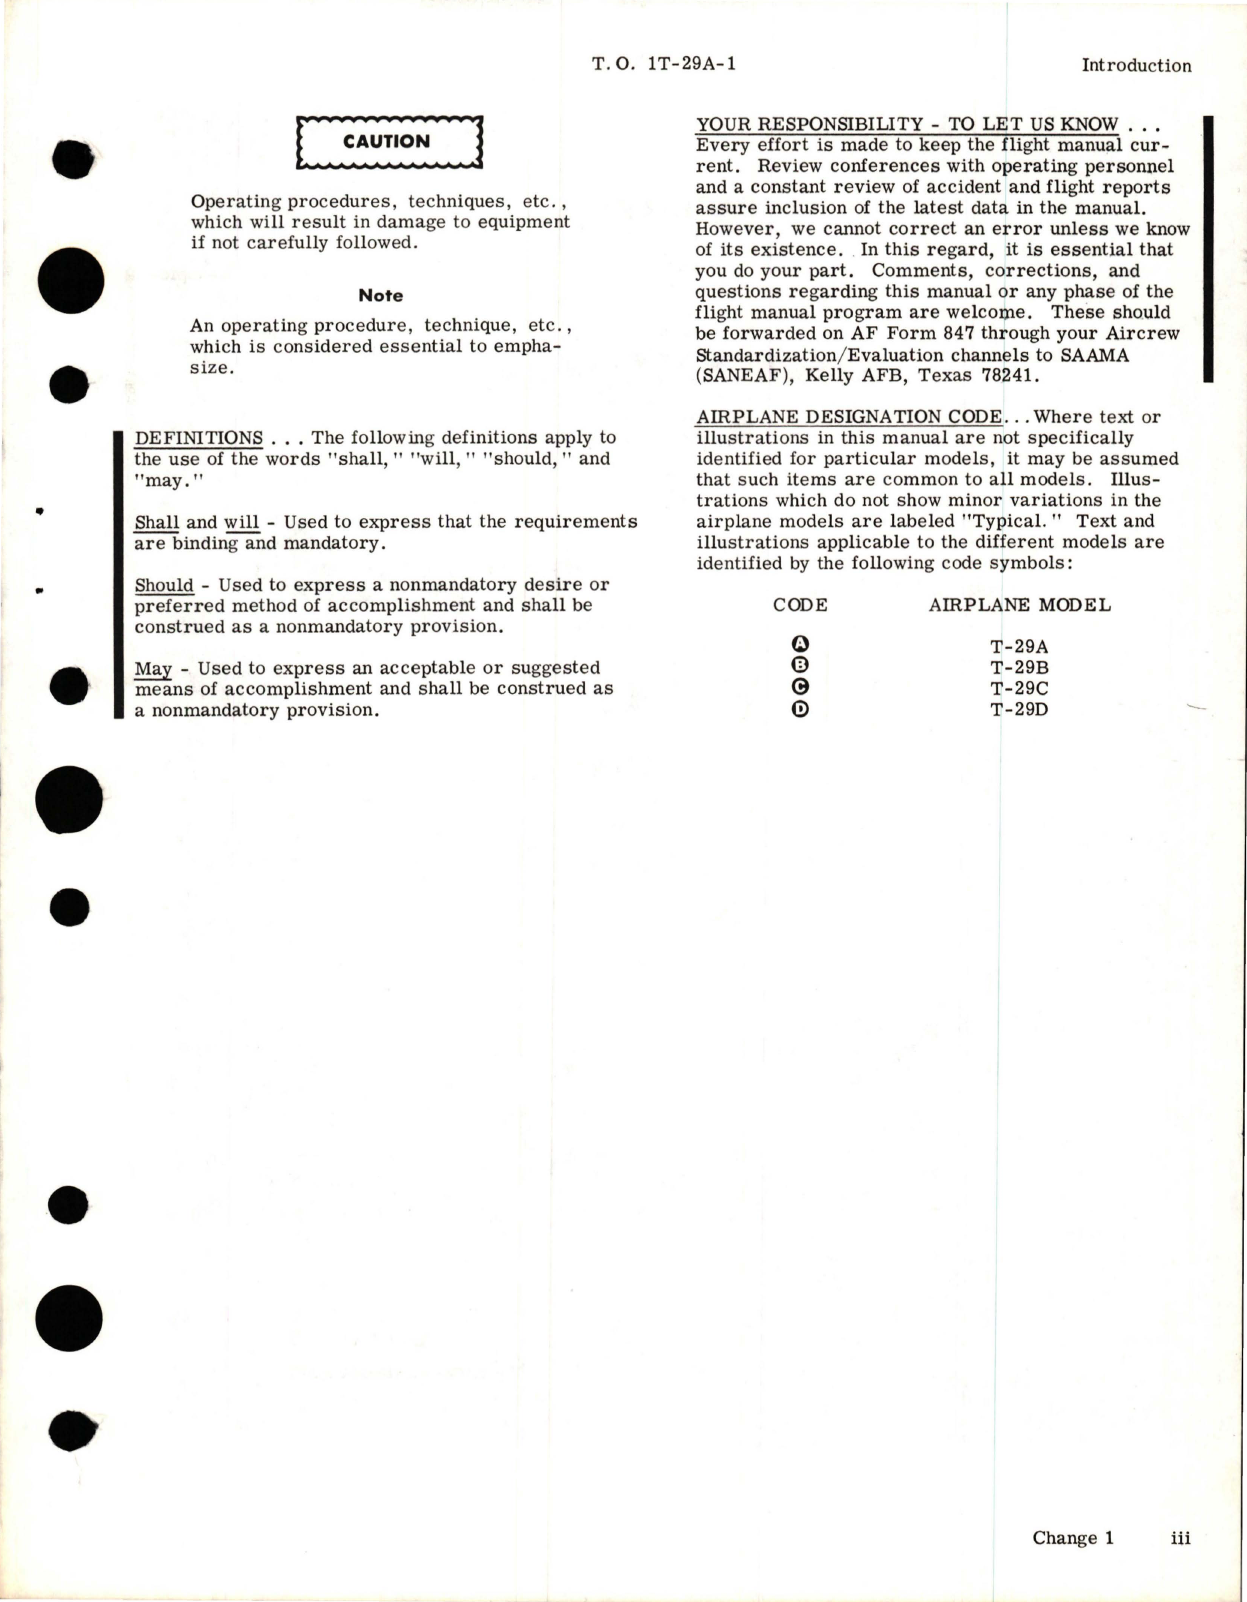 Sample page 9 from AirCorps Library document: Flight Manual for T-29A, T-29B, T-29C, T-29D